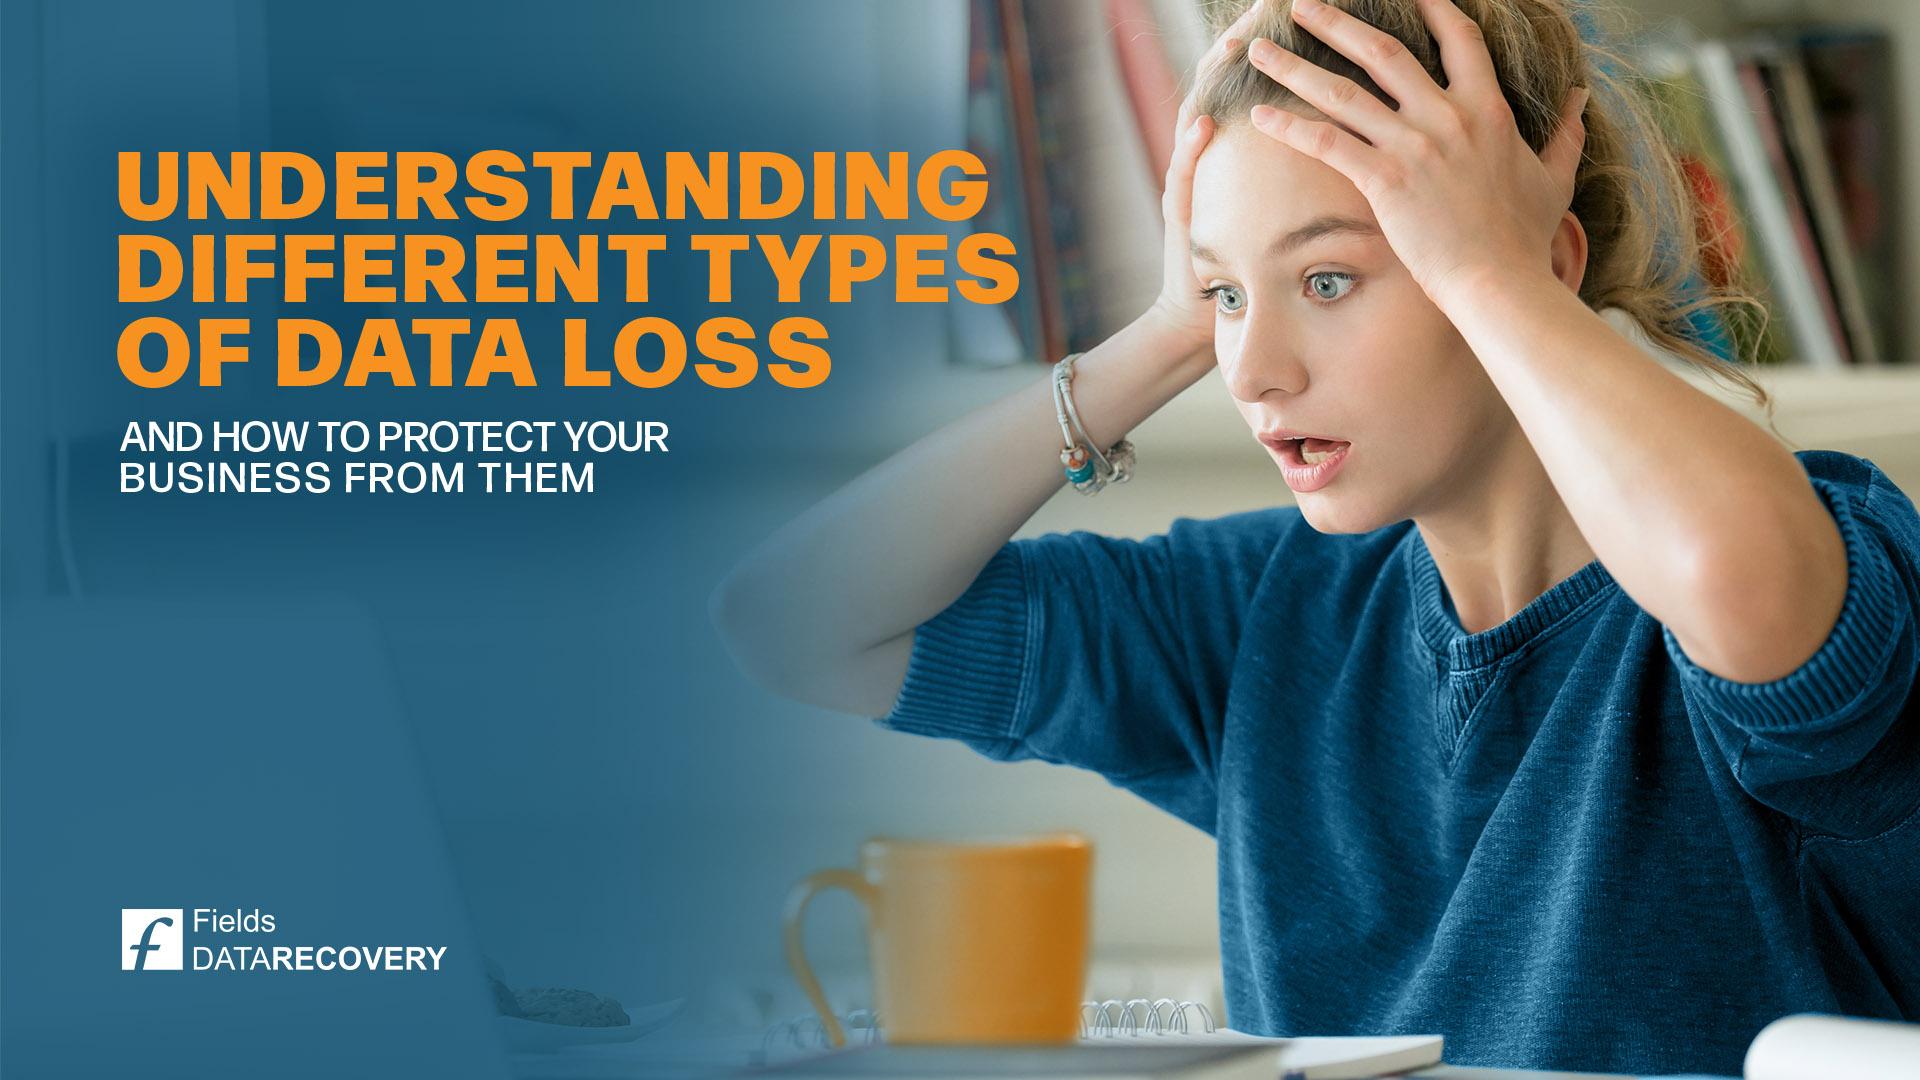 Understanding Different Types of Data Loss and How to Protect Your Business from Them